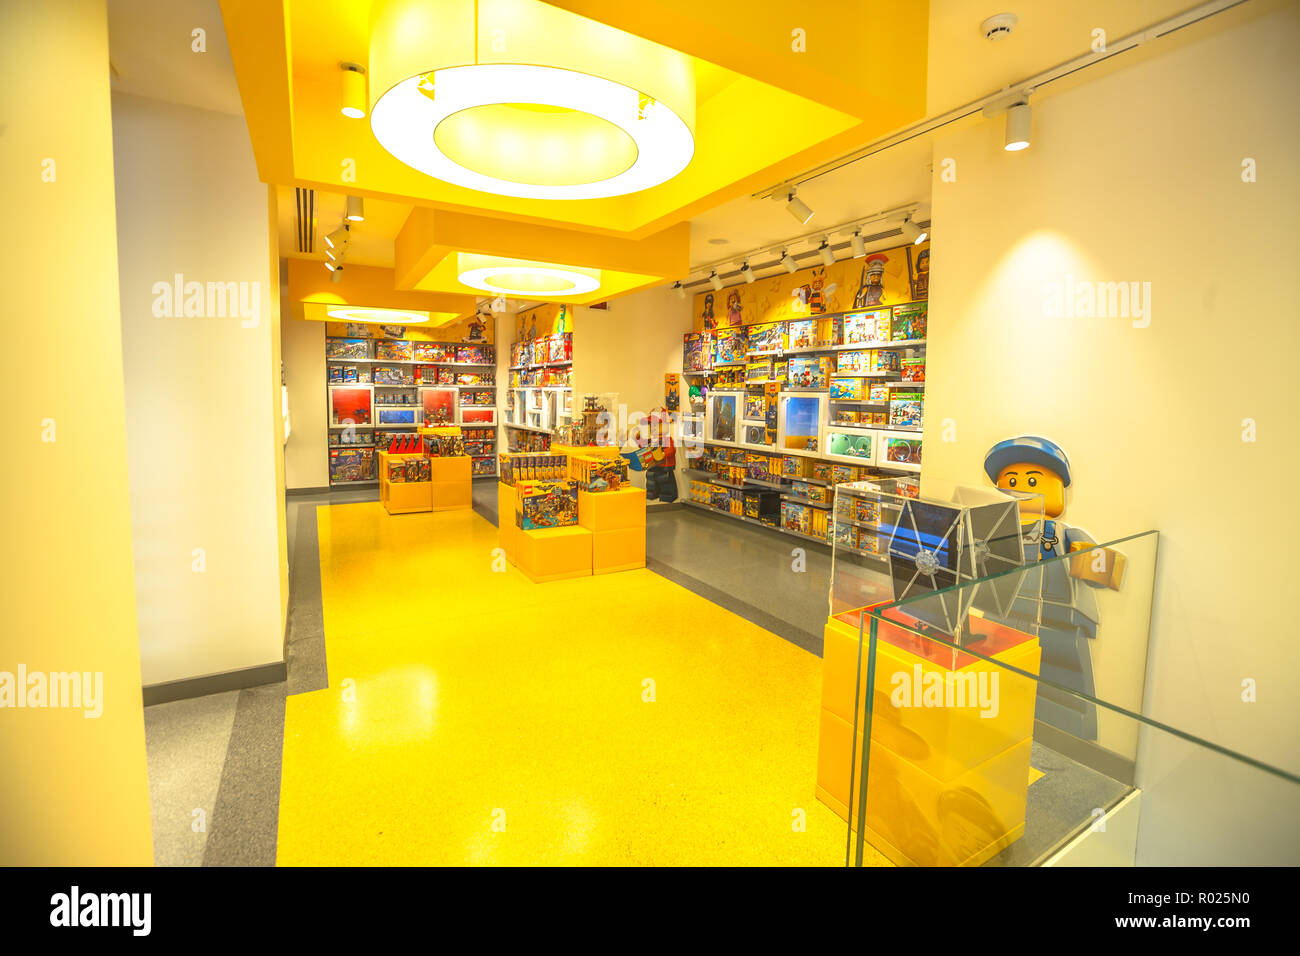 Toy Store Interior High Resolution Stock Photography and Images - Alamy